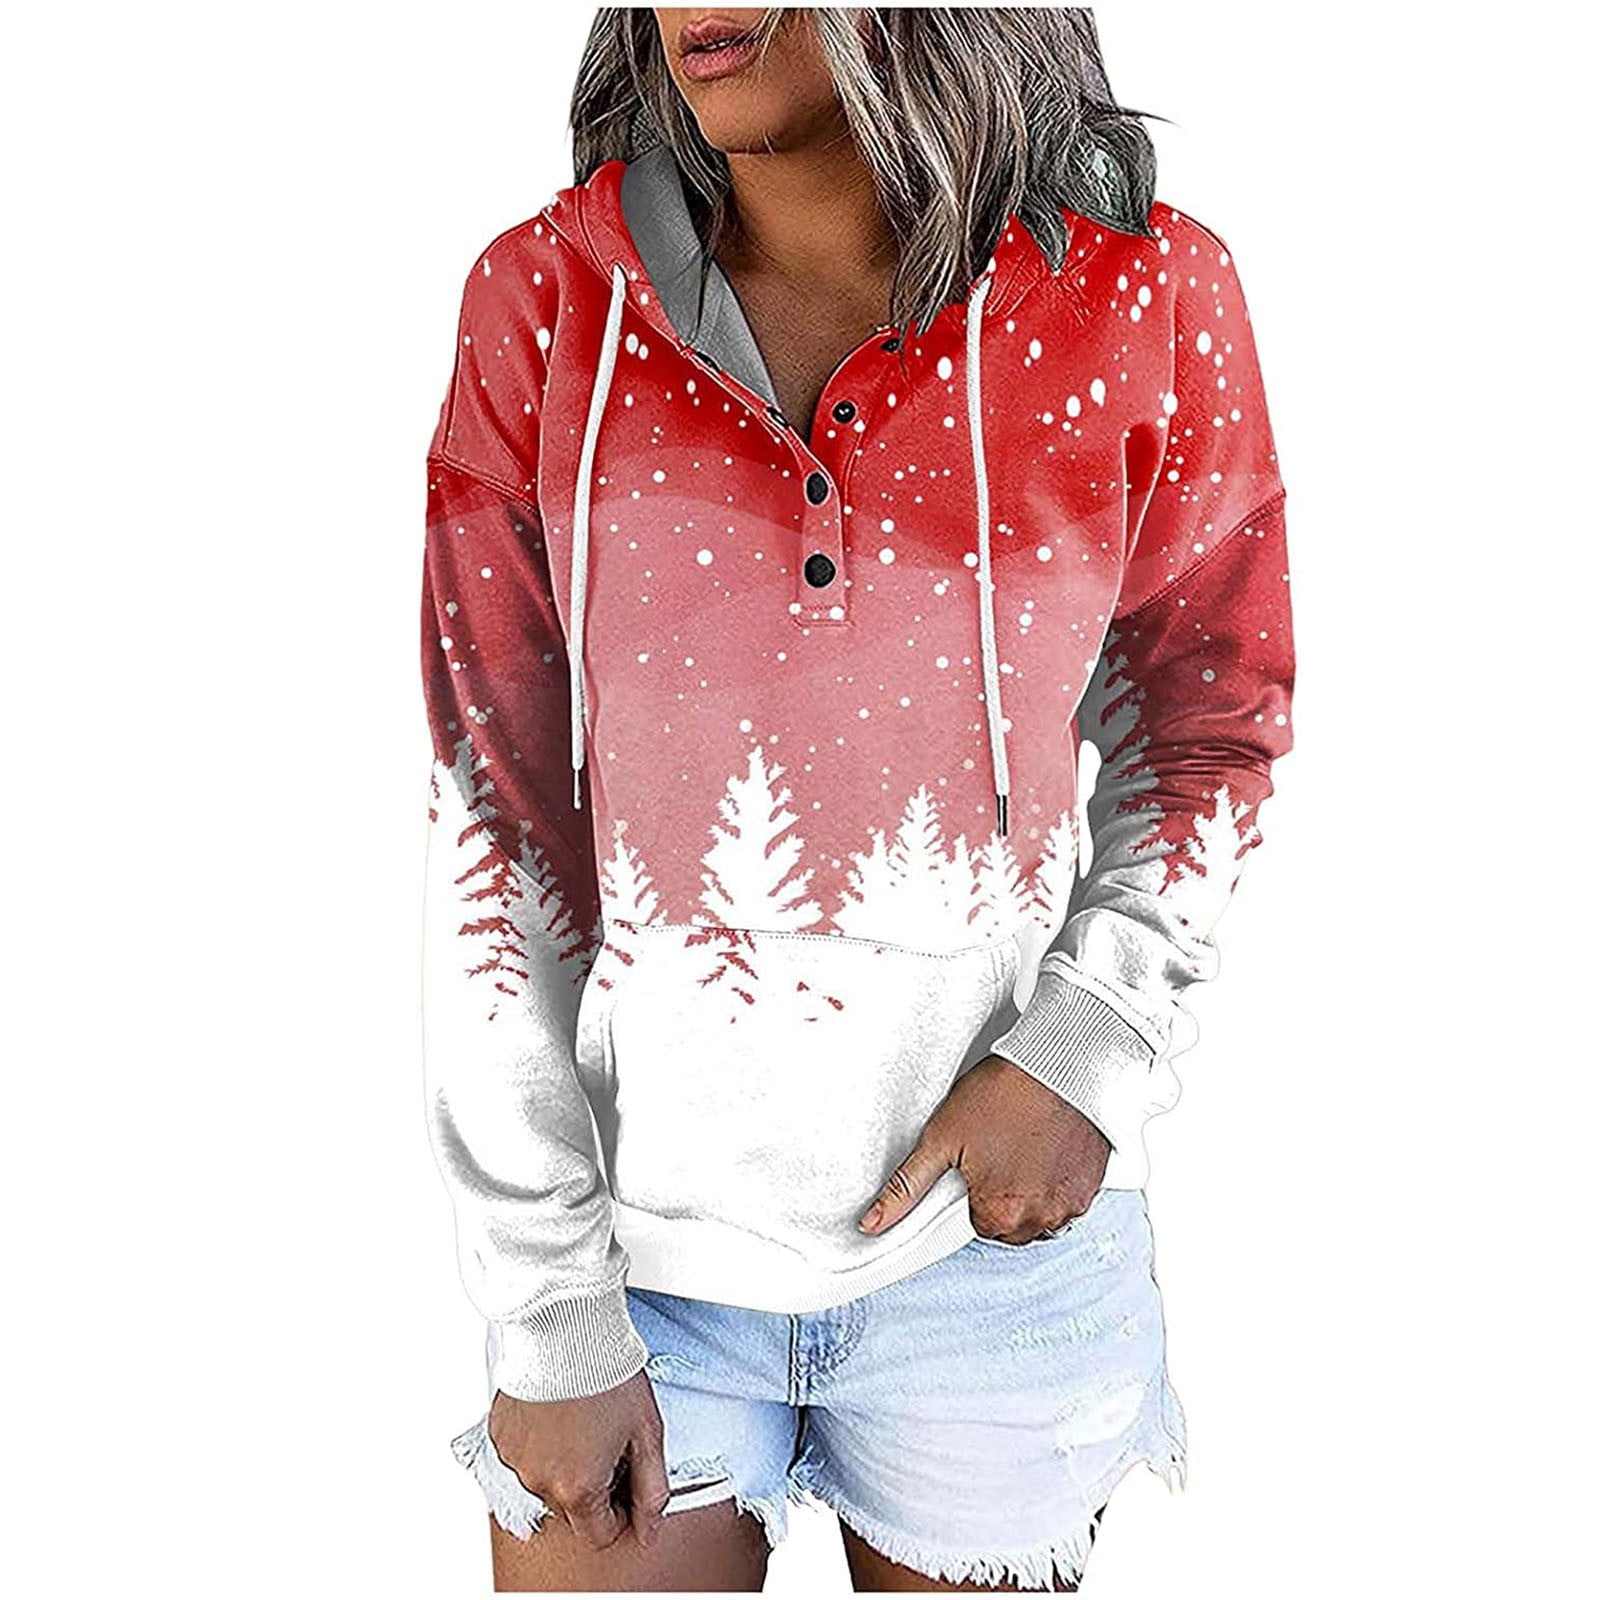 Miximx Women Cute Printed Hoodies Autumn Drawstring Long Sleeve Tops Casual Soft Solid Color Pullover with Pockets Sweatshirt 